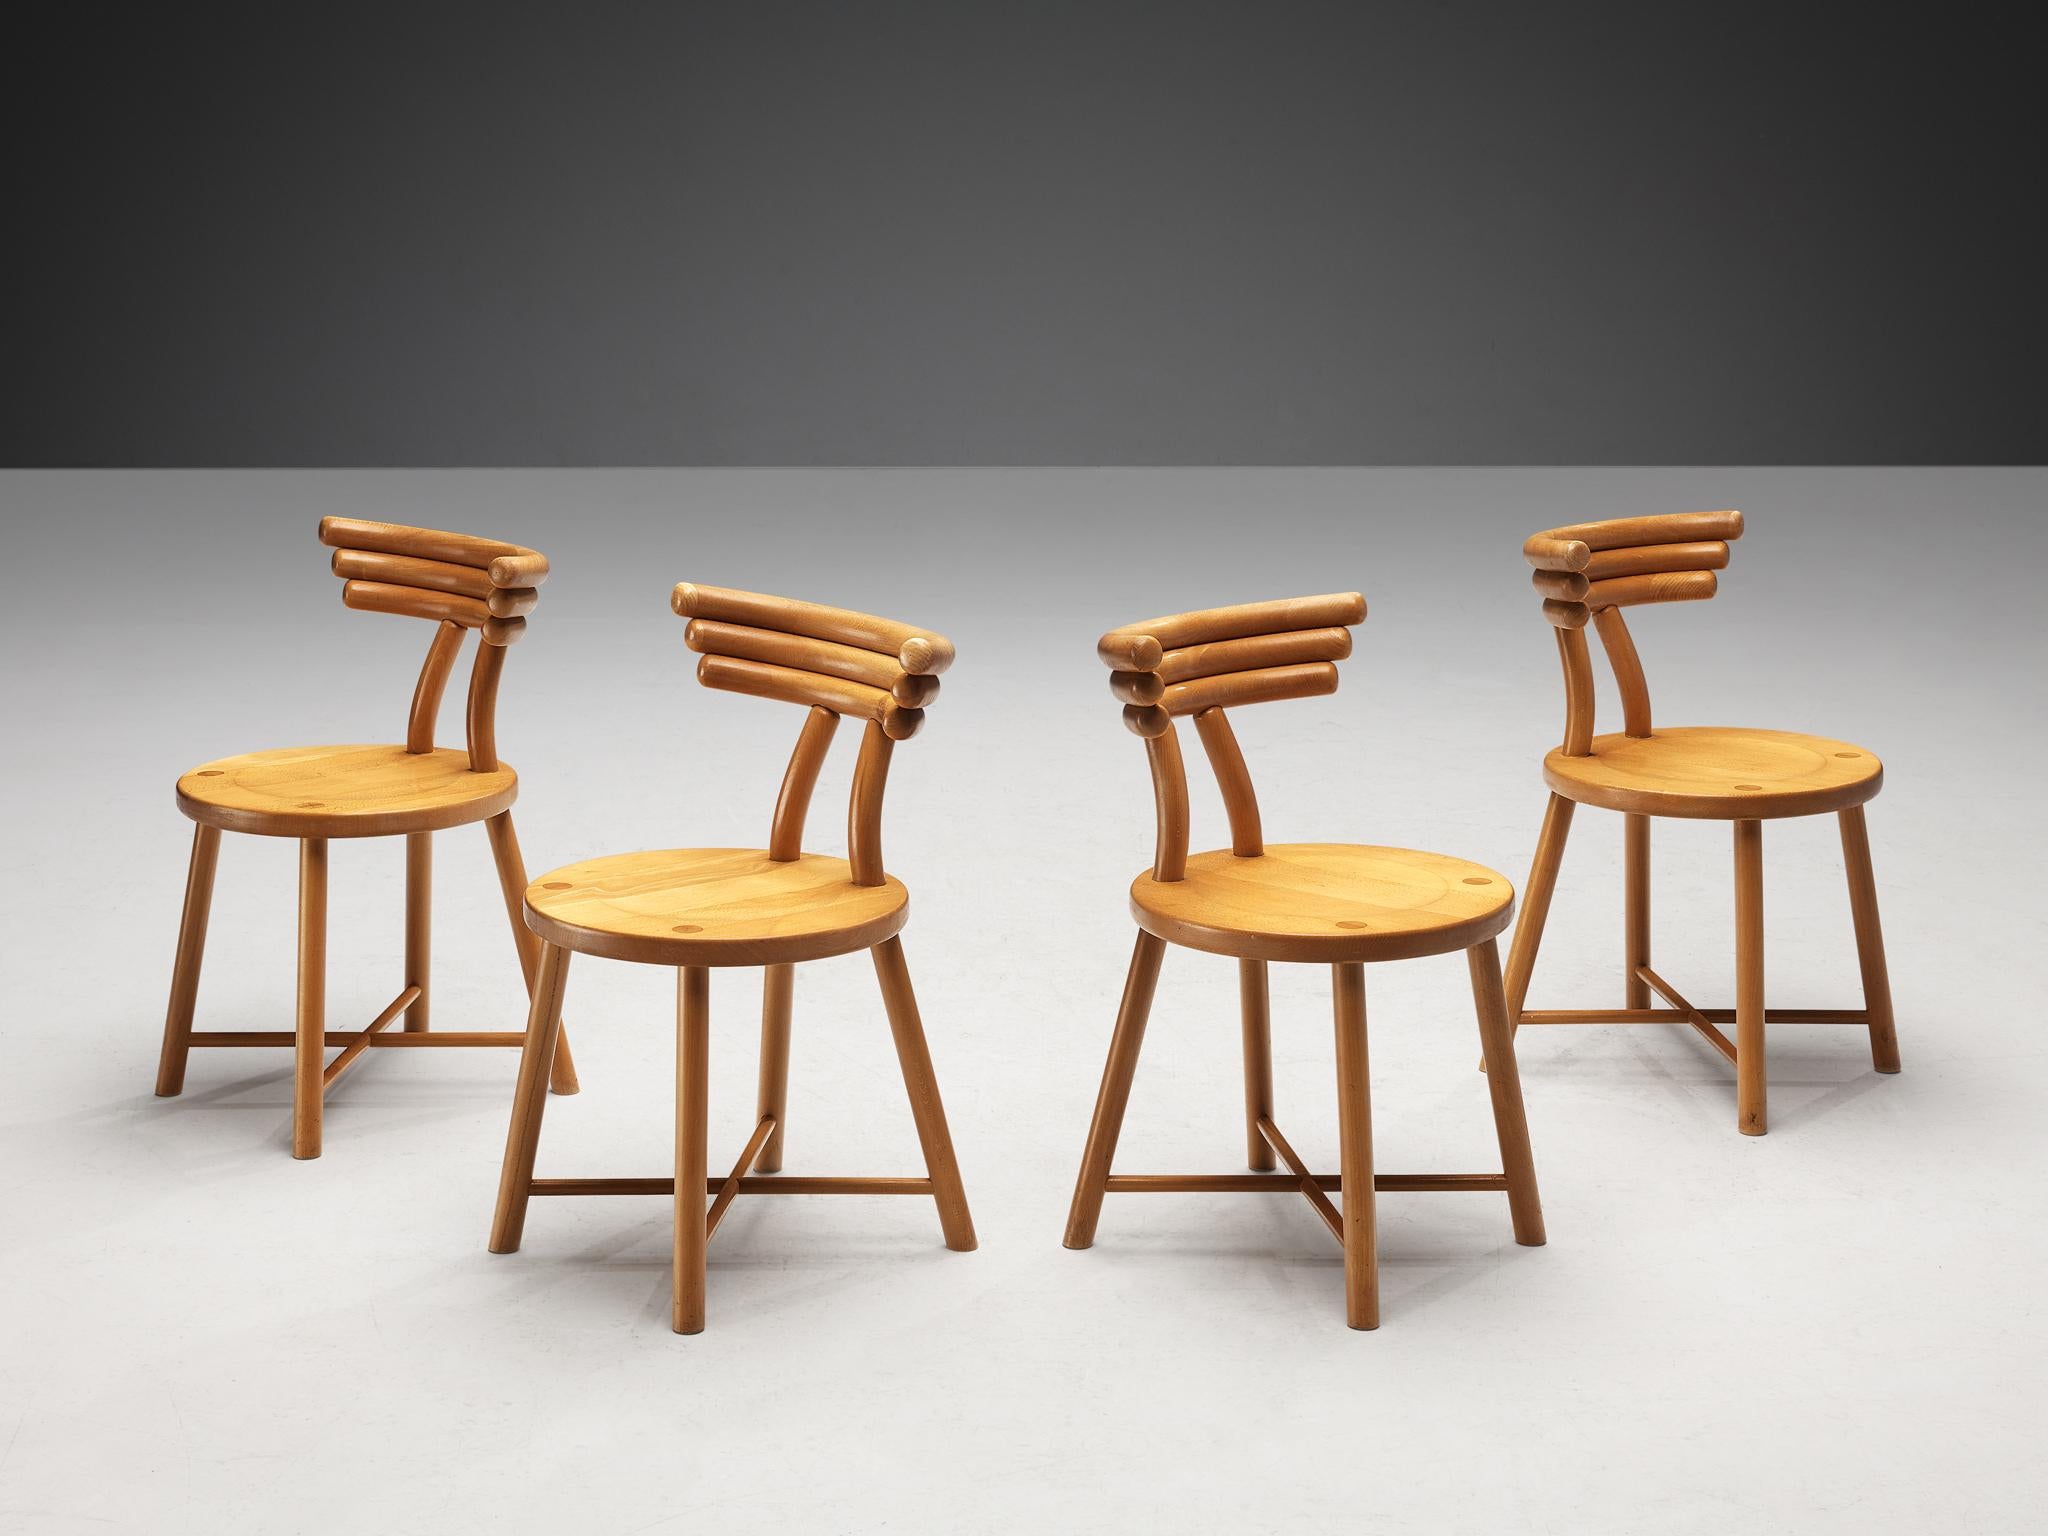 Set of four dining chairs, beech, Germany, 1970s. 

This chair has a visually interesting construction. The backrest is composed of round shaped slats executed in an artistic manner. The visible wood joints seen on the seat attests the great